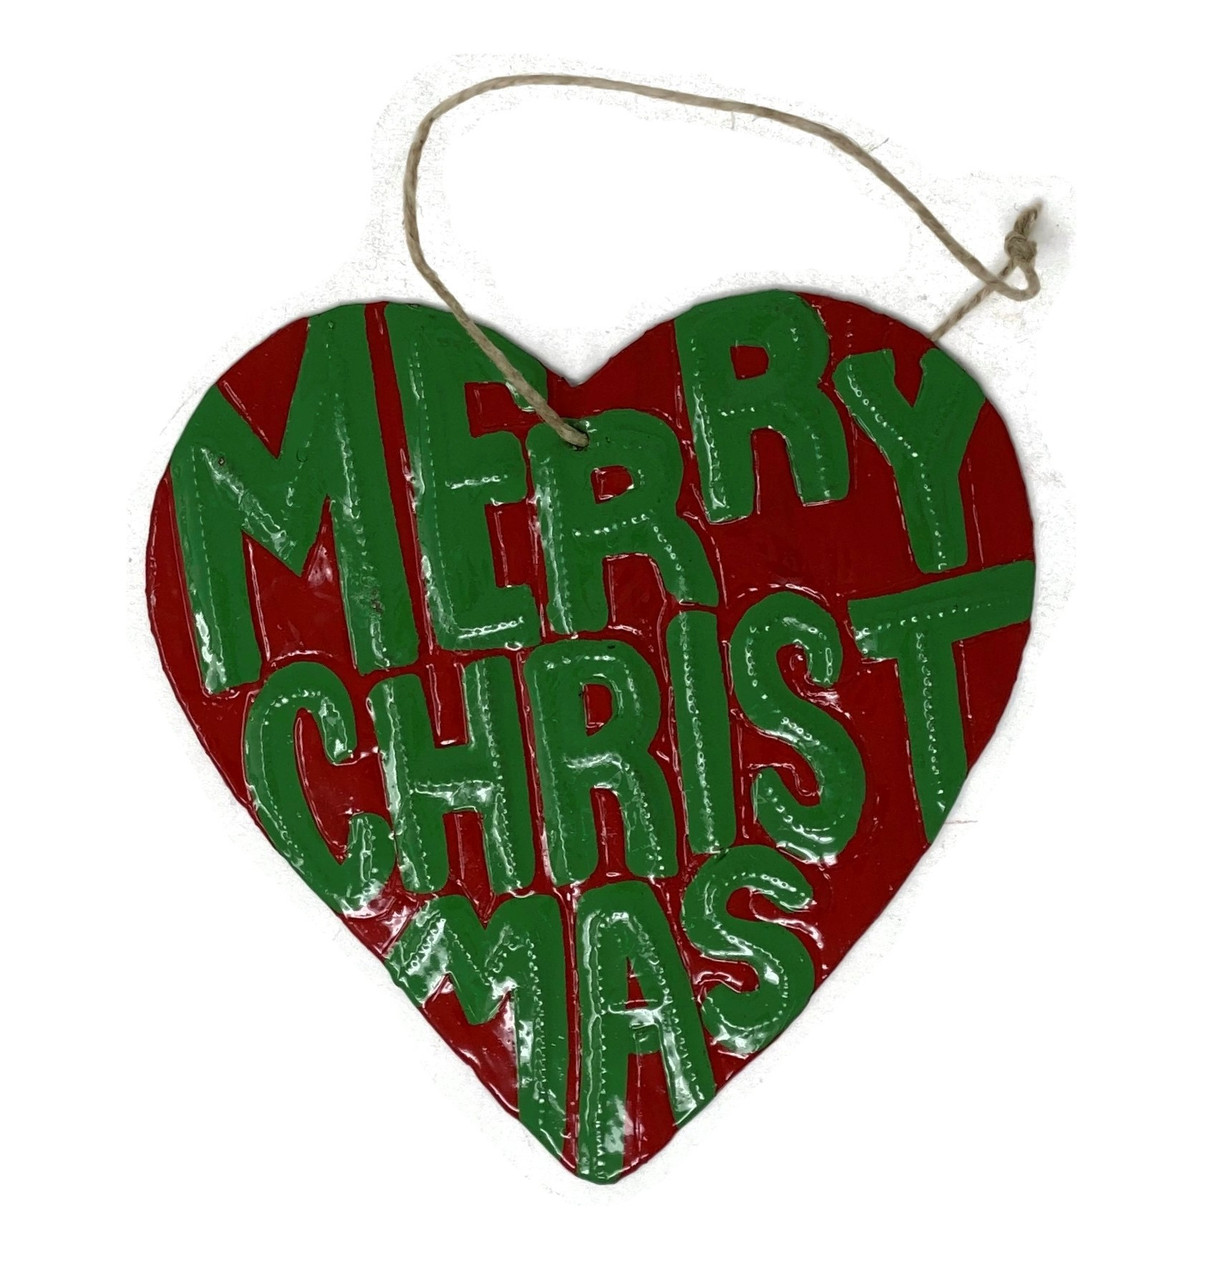 Christmas Ornaments, Merry Christmas, Hand Painted Heart Shaped Ornament, Decorative Haitian Artwork 4.25 x 4.5 Inches